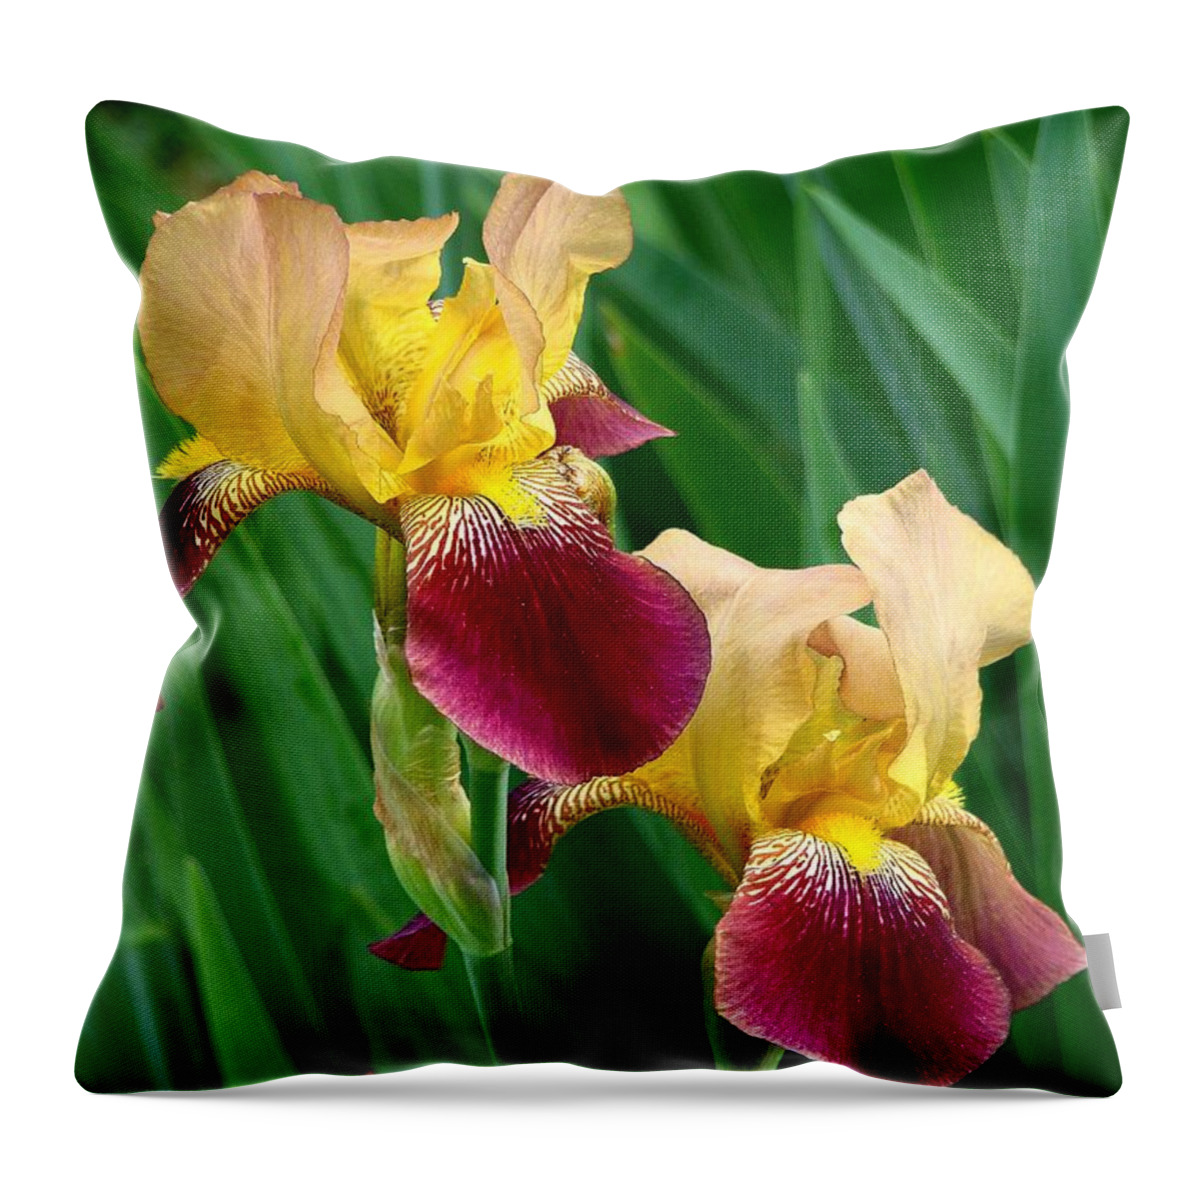 Fine Art Throw Pillow featuring the photograph Two Iris by Rodney Lee Williams